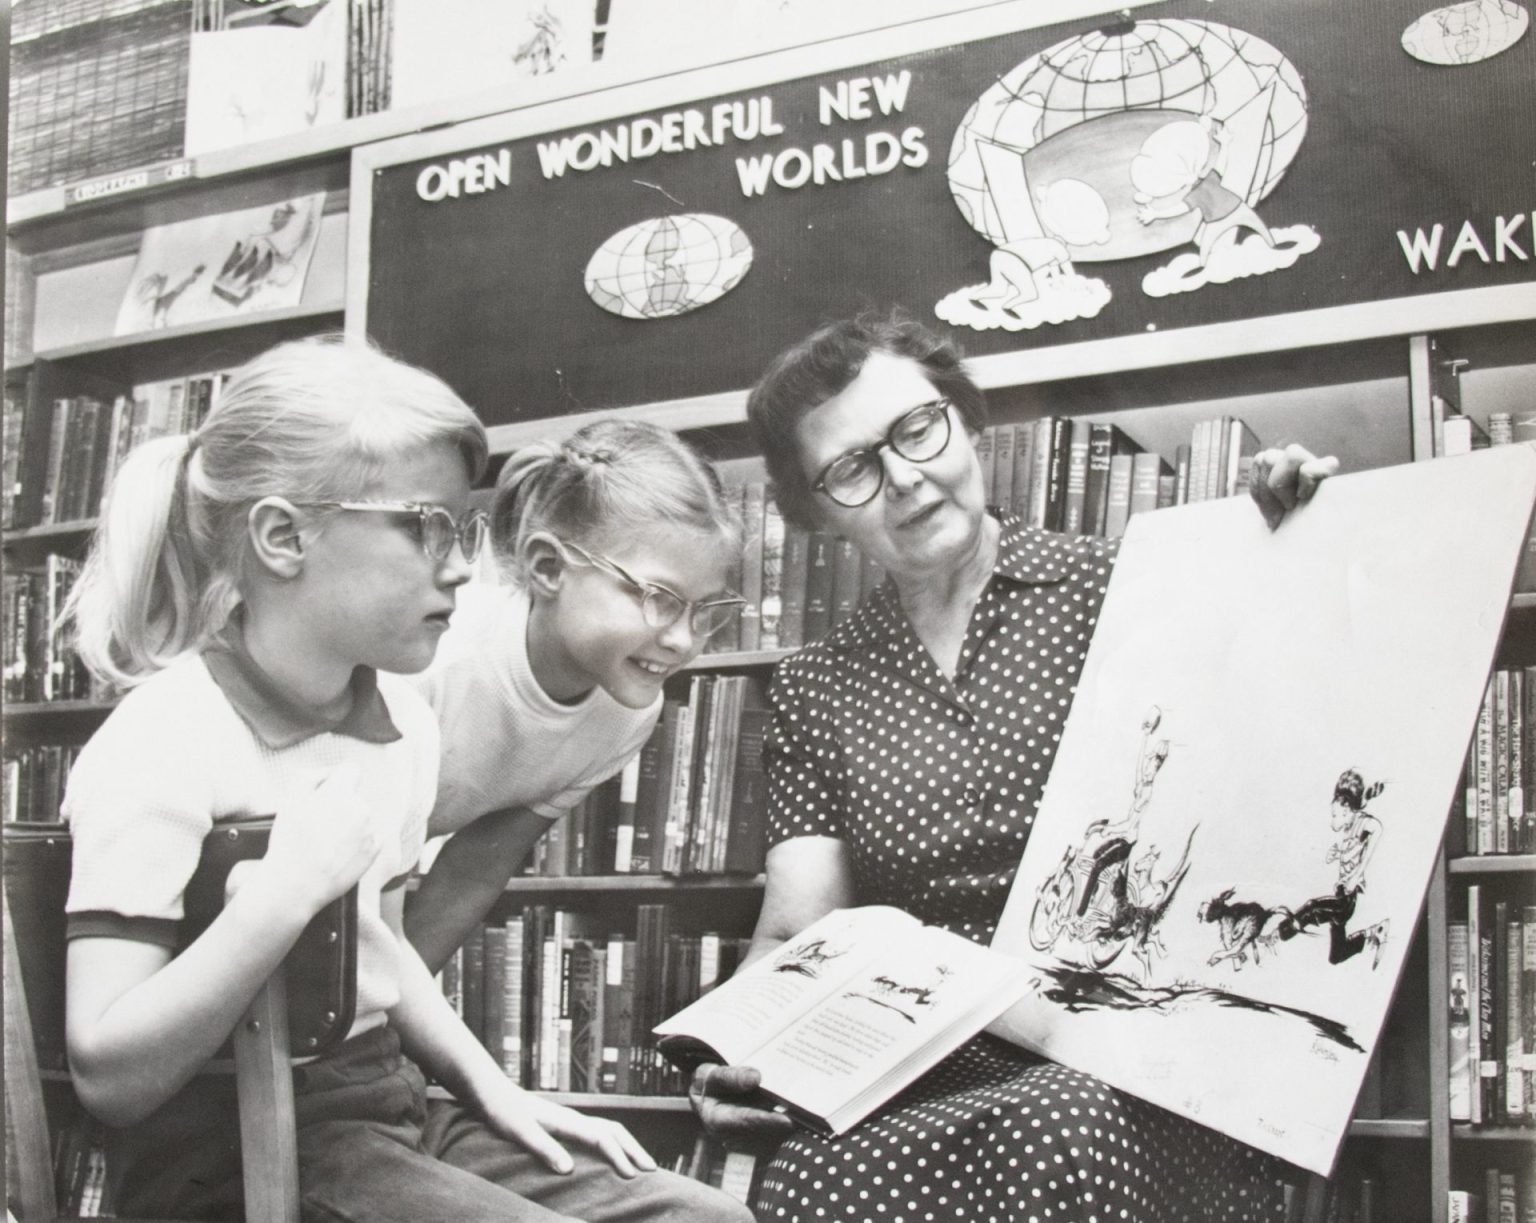 Two girls with glasses look at art held by a woman with glasses, dark hair and a polka-dotted dress in this black and white photo.